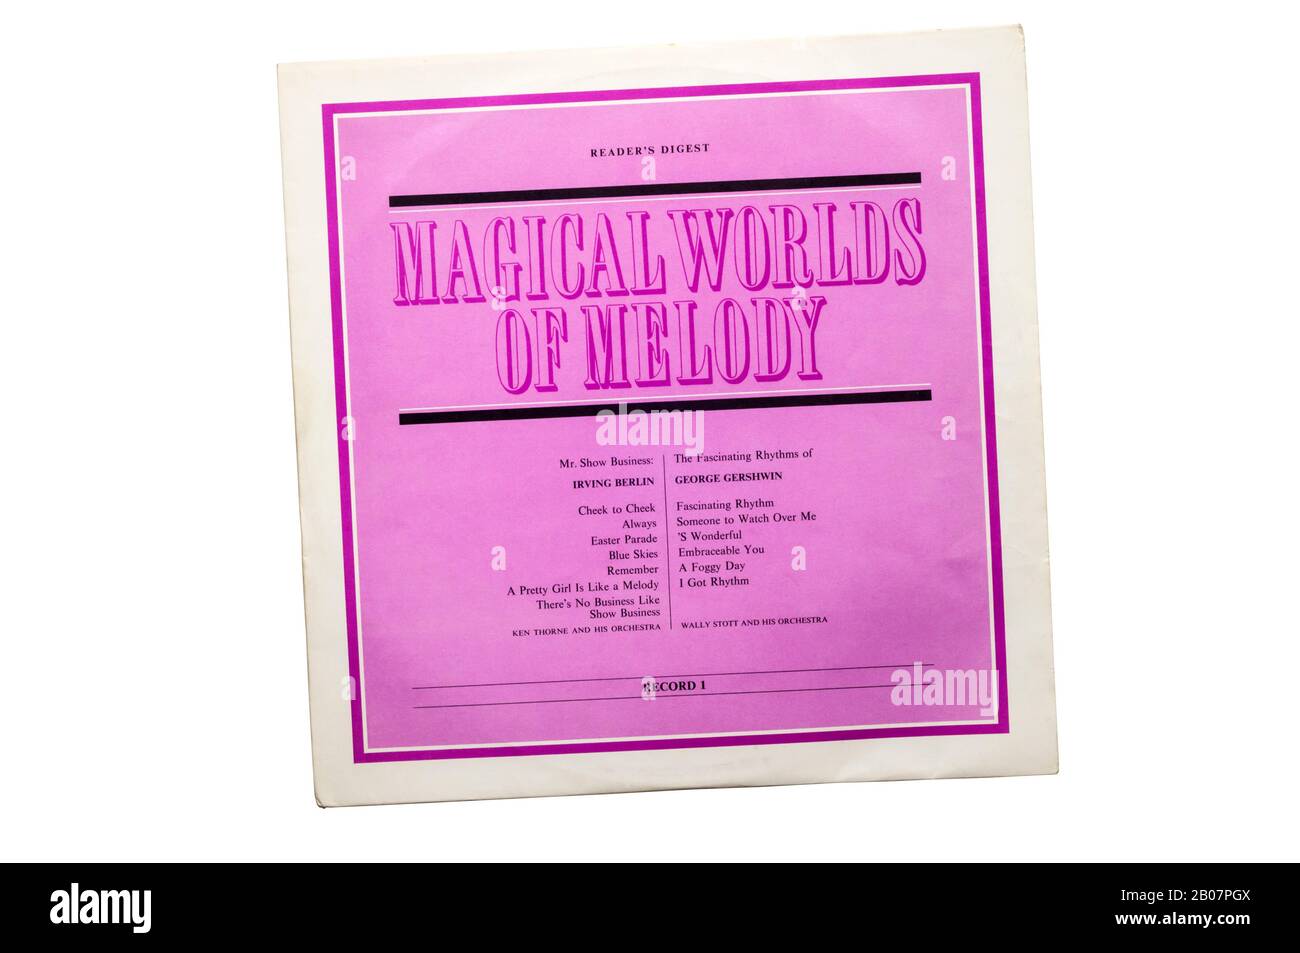 Magical Worlds of Melody was a 10 LP box set released by Readers Digest in 1963.  First record in set shown featuring Irving Berlin & George Gershwin. Stock Photo